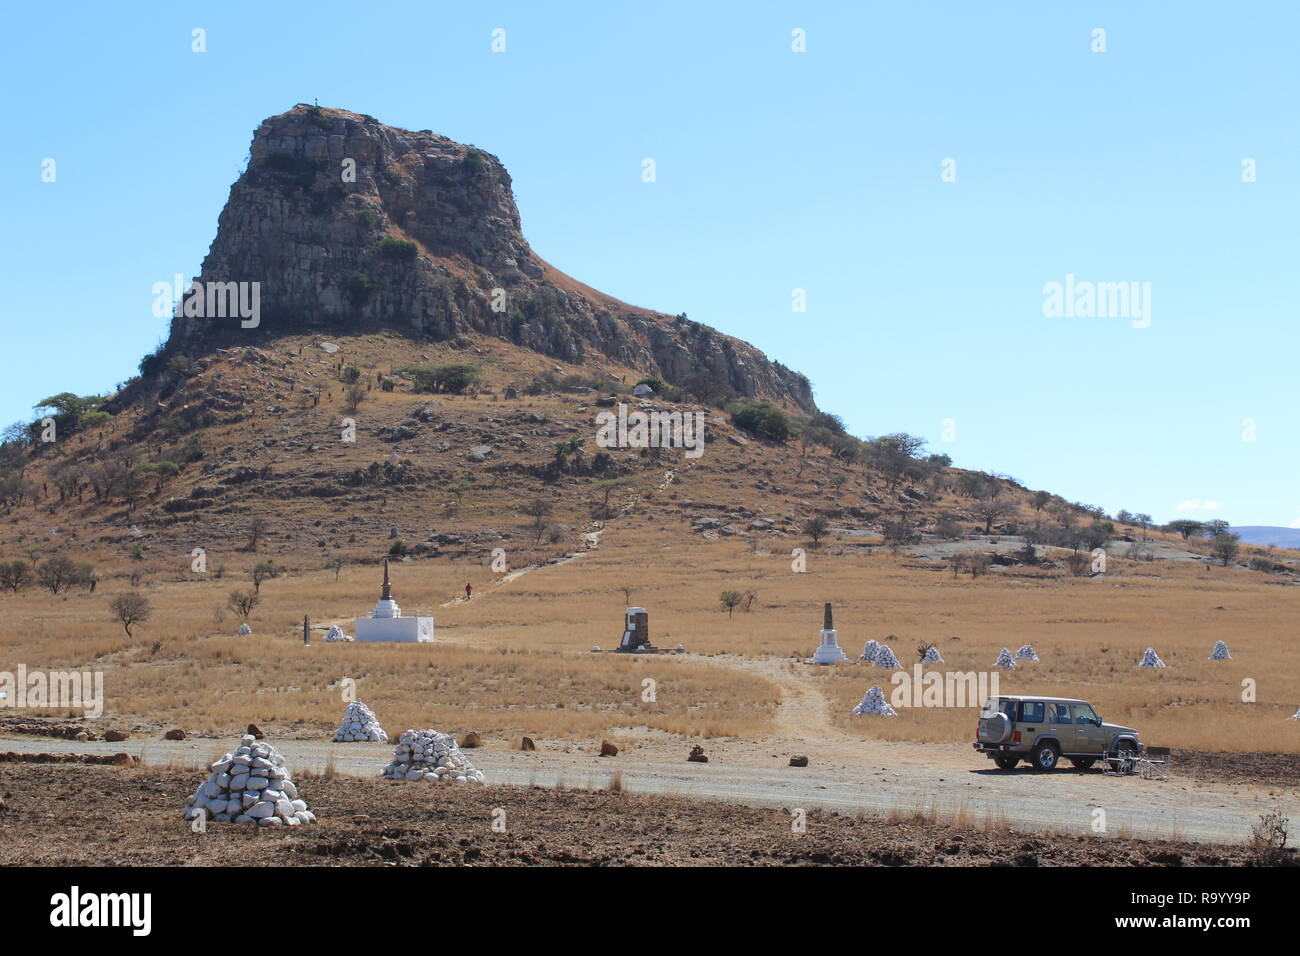 Isandlwana battle site, KwaZulu-Natal, South Africa, where the British Army fought the Zulus on 22nd January 1879 and suffered a major defeat. Stock Photo